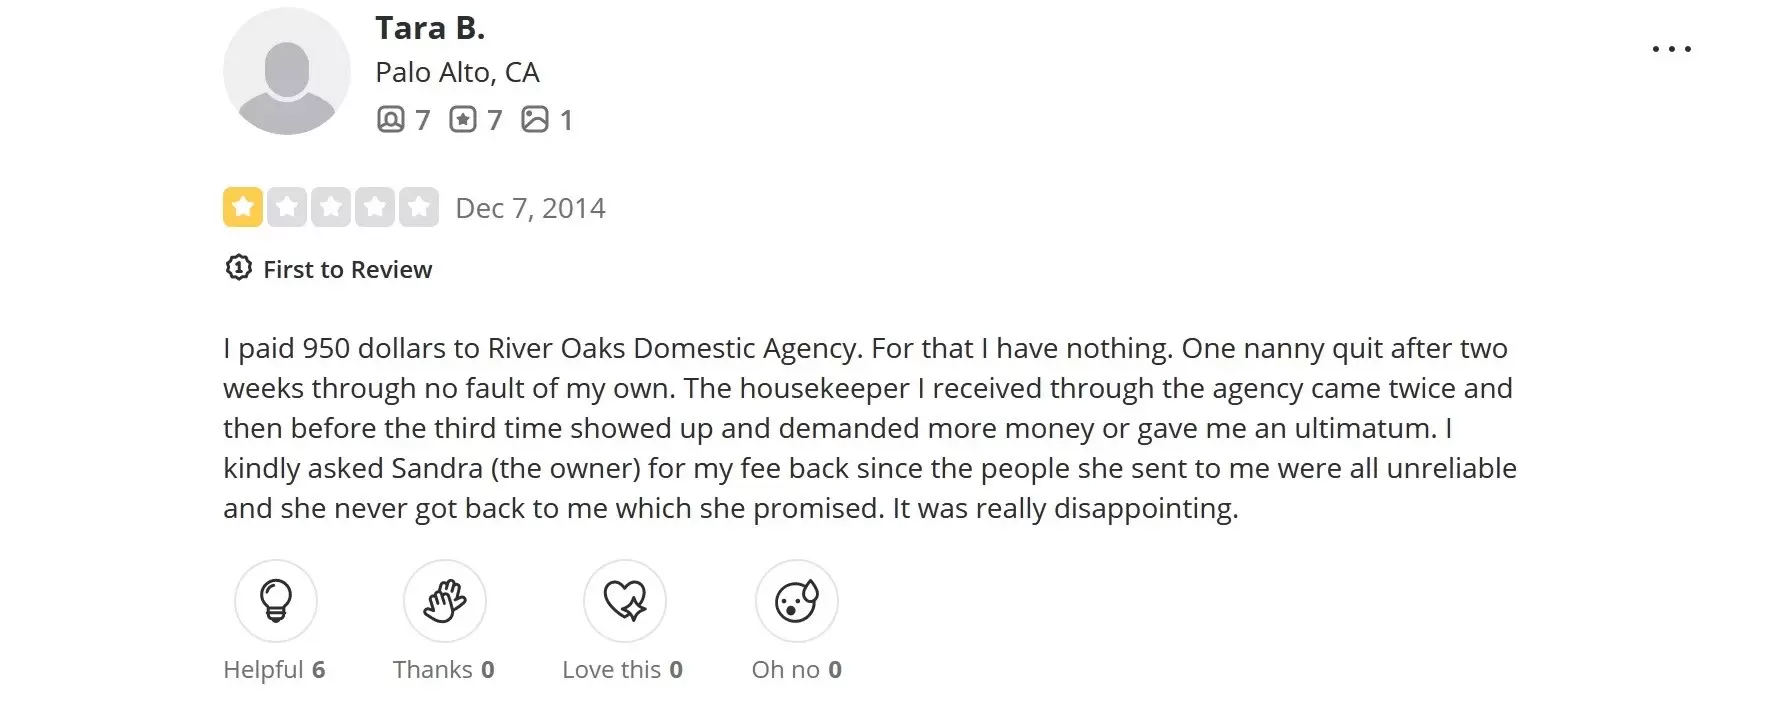 critical review of the River Oaks Domestic Agency